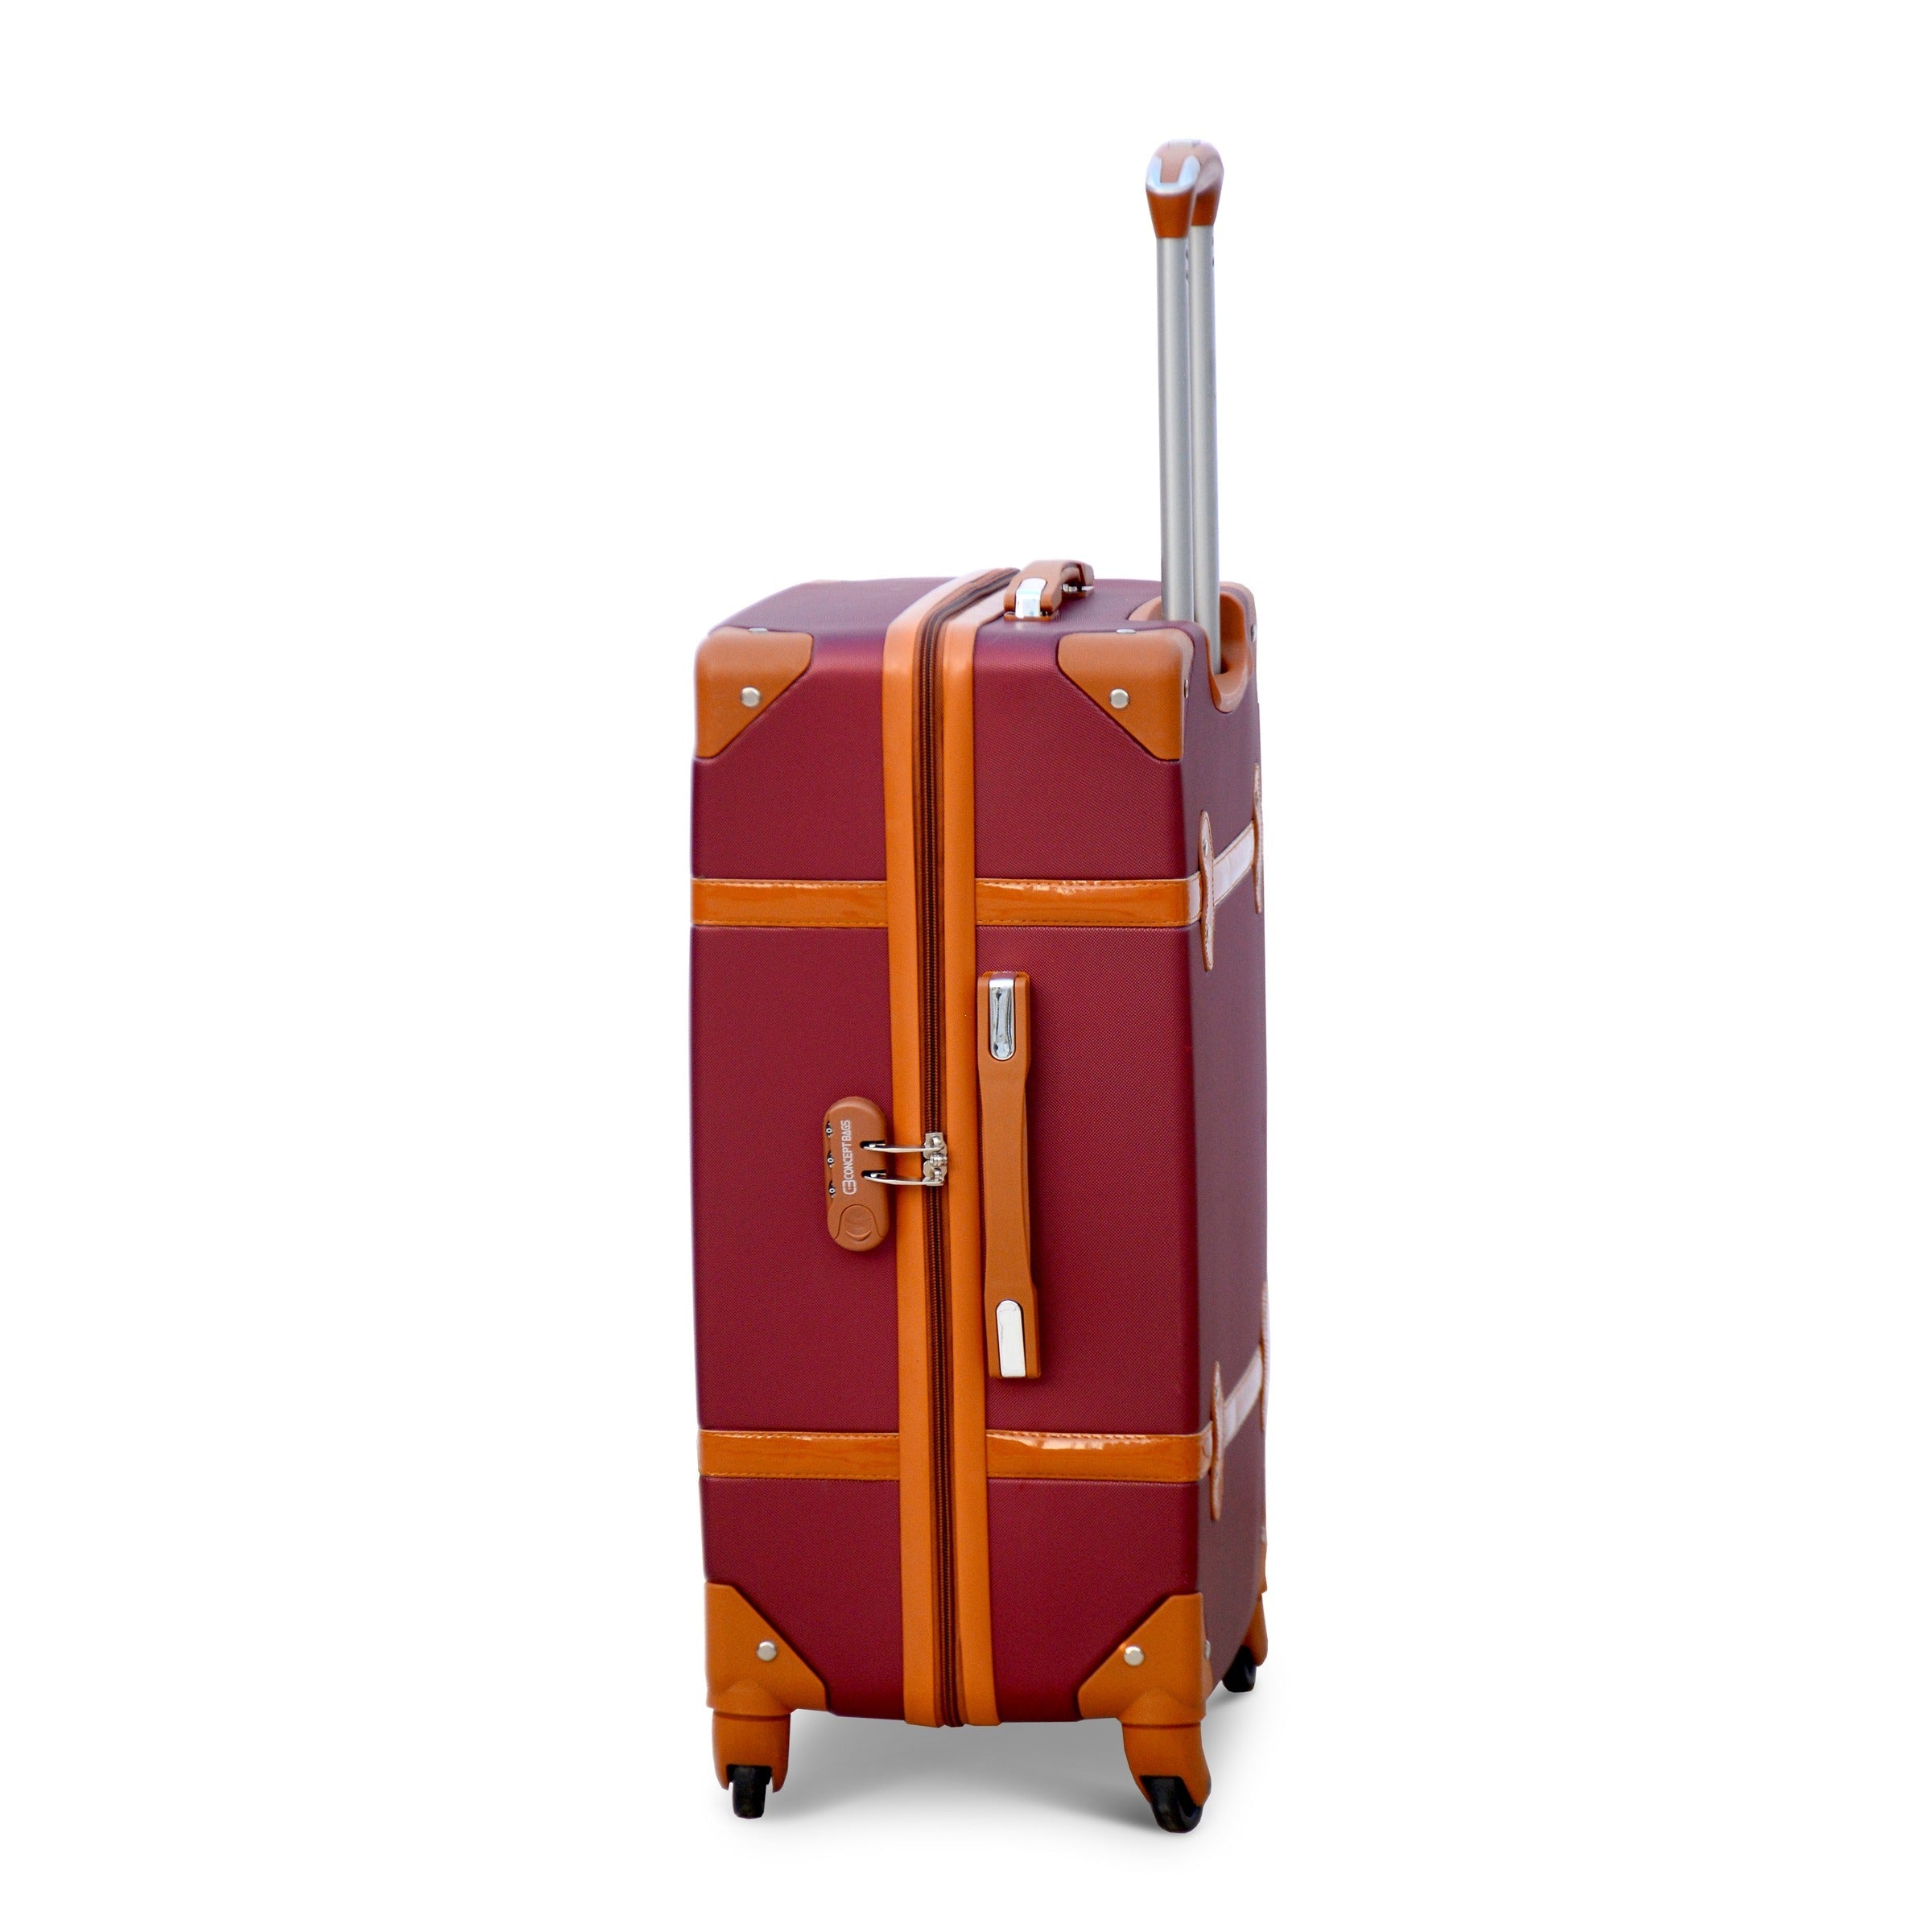 20" Corner Guard ABS Burgundy Lightweight Carry On Luggage Bag With Spinner Wheel